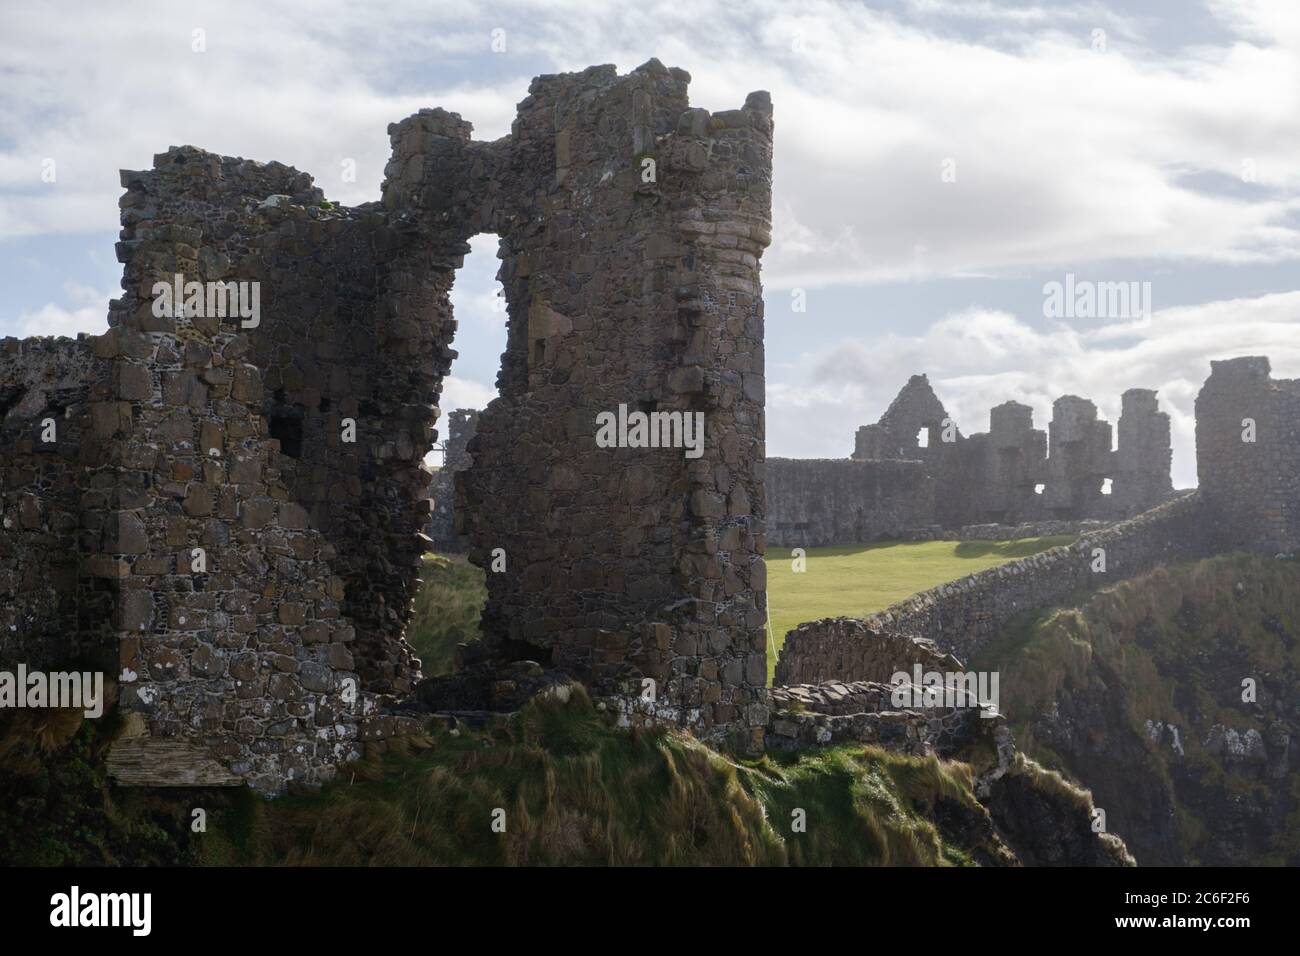 Mystical, ethereal view of the ruins of Dunluce Castle a filming location for the TV series Game of Thrones near Portrush in Northern Ireland Stock Photo